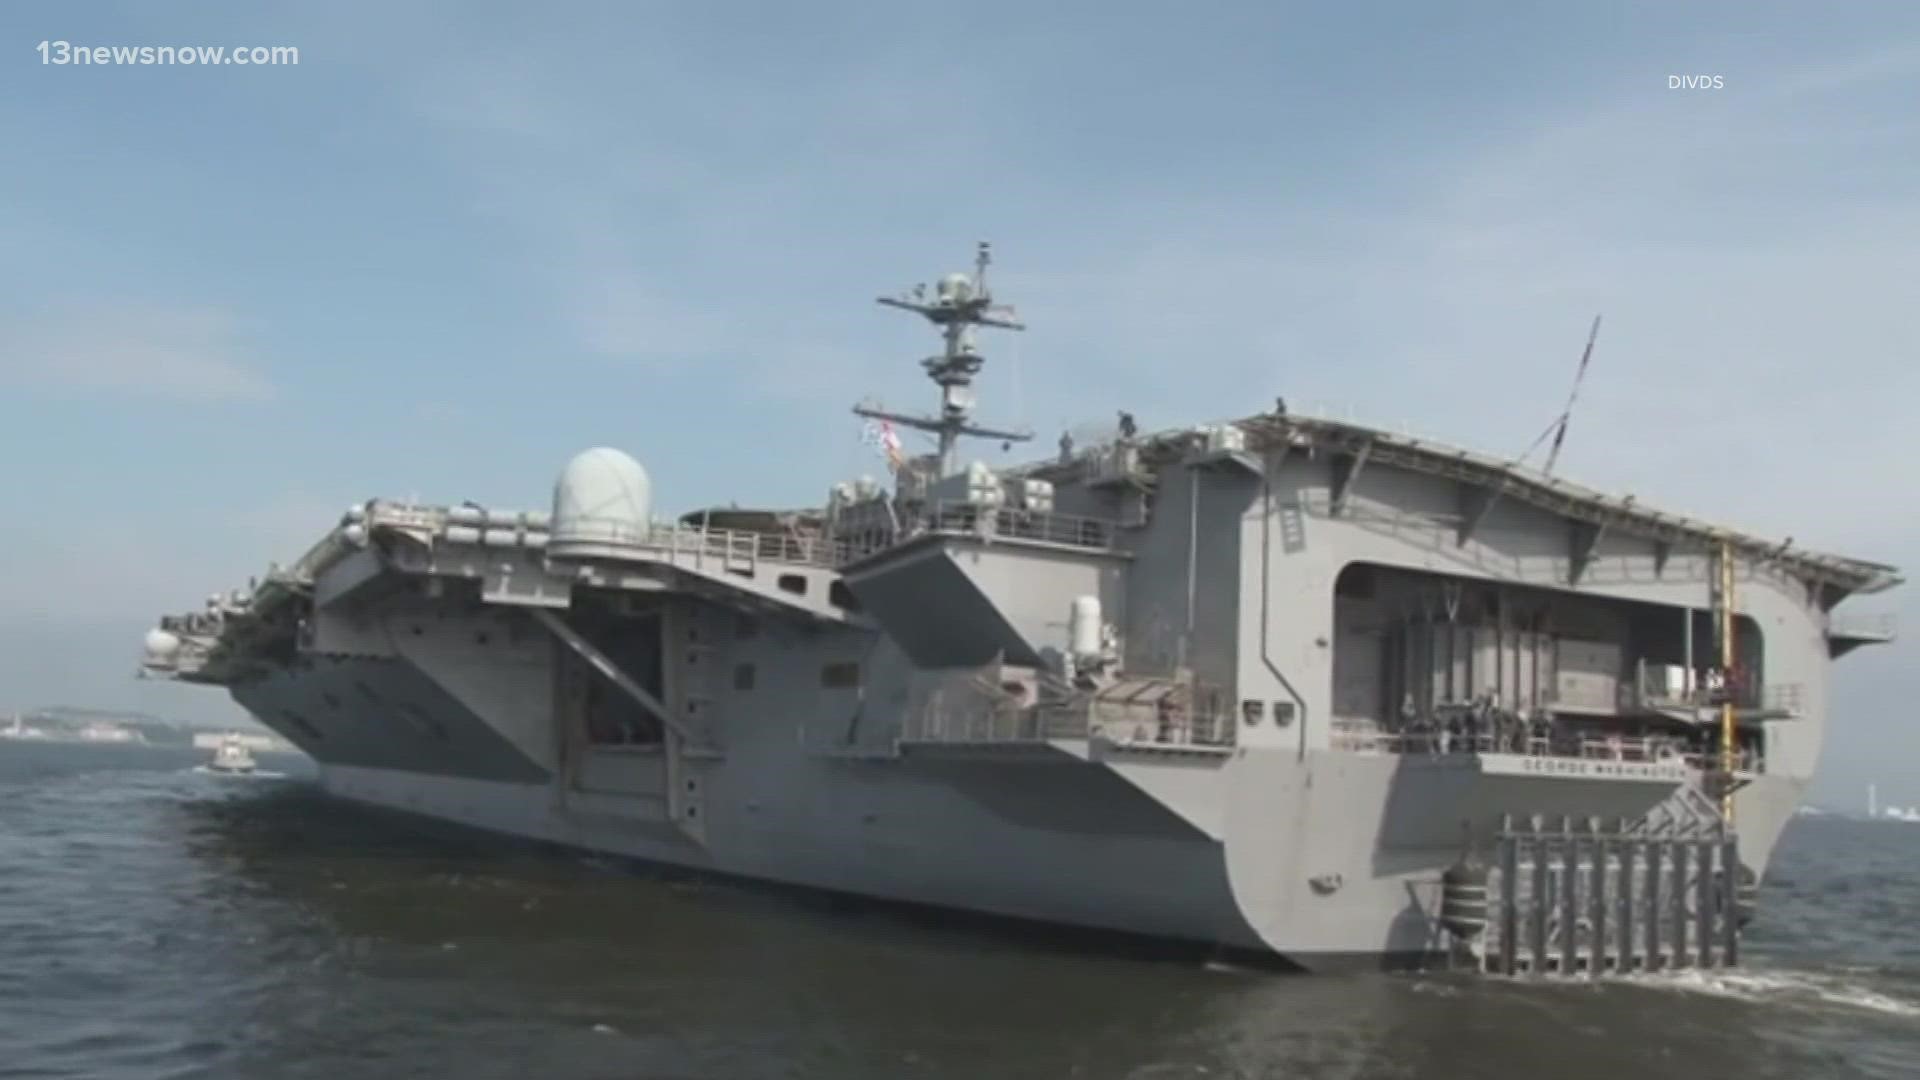 According to USNI News, it was Xavier Mitchell-Sandor. Officials found him unresponsive on the carrier on April 15th.